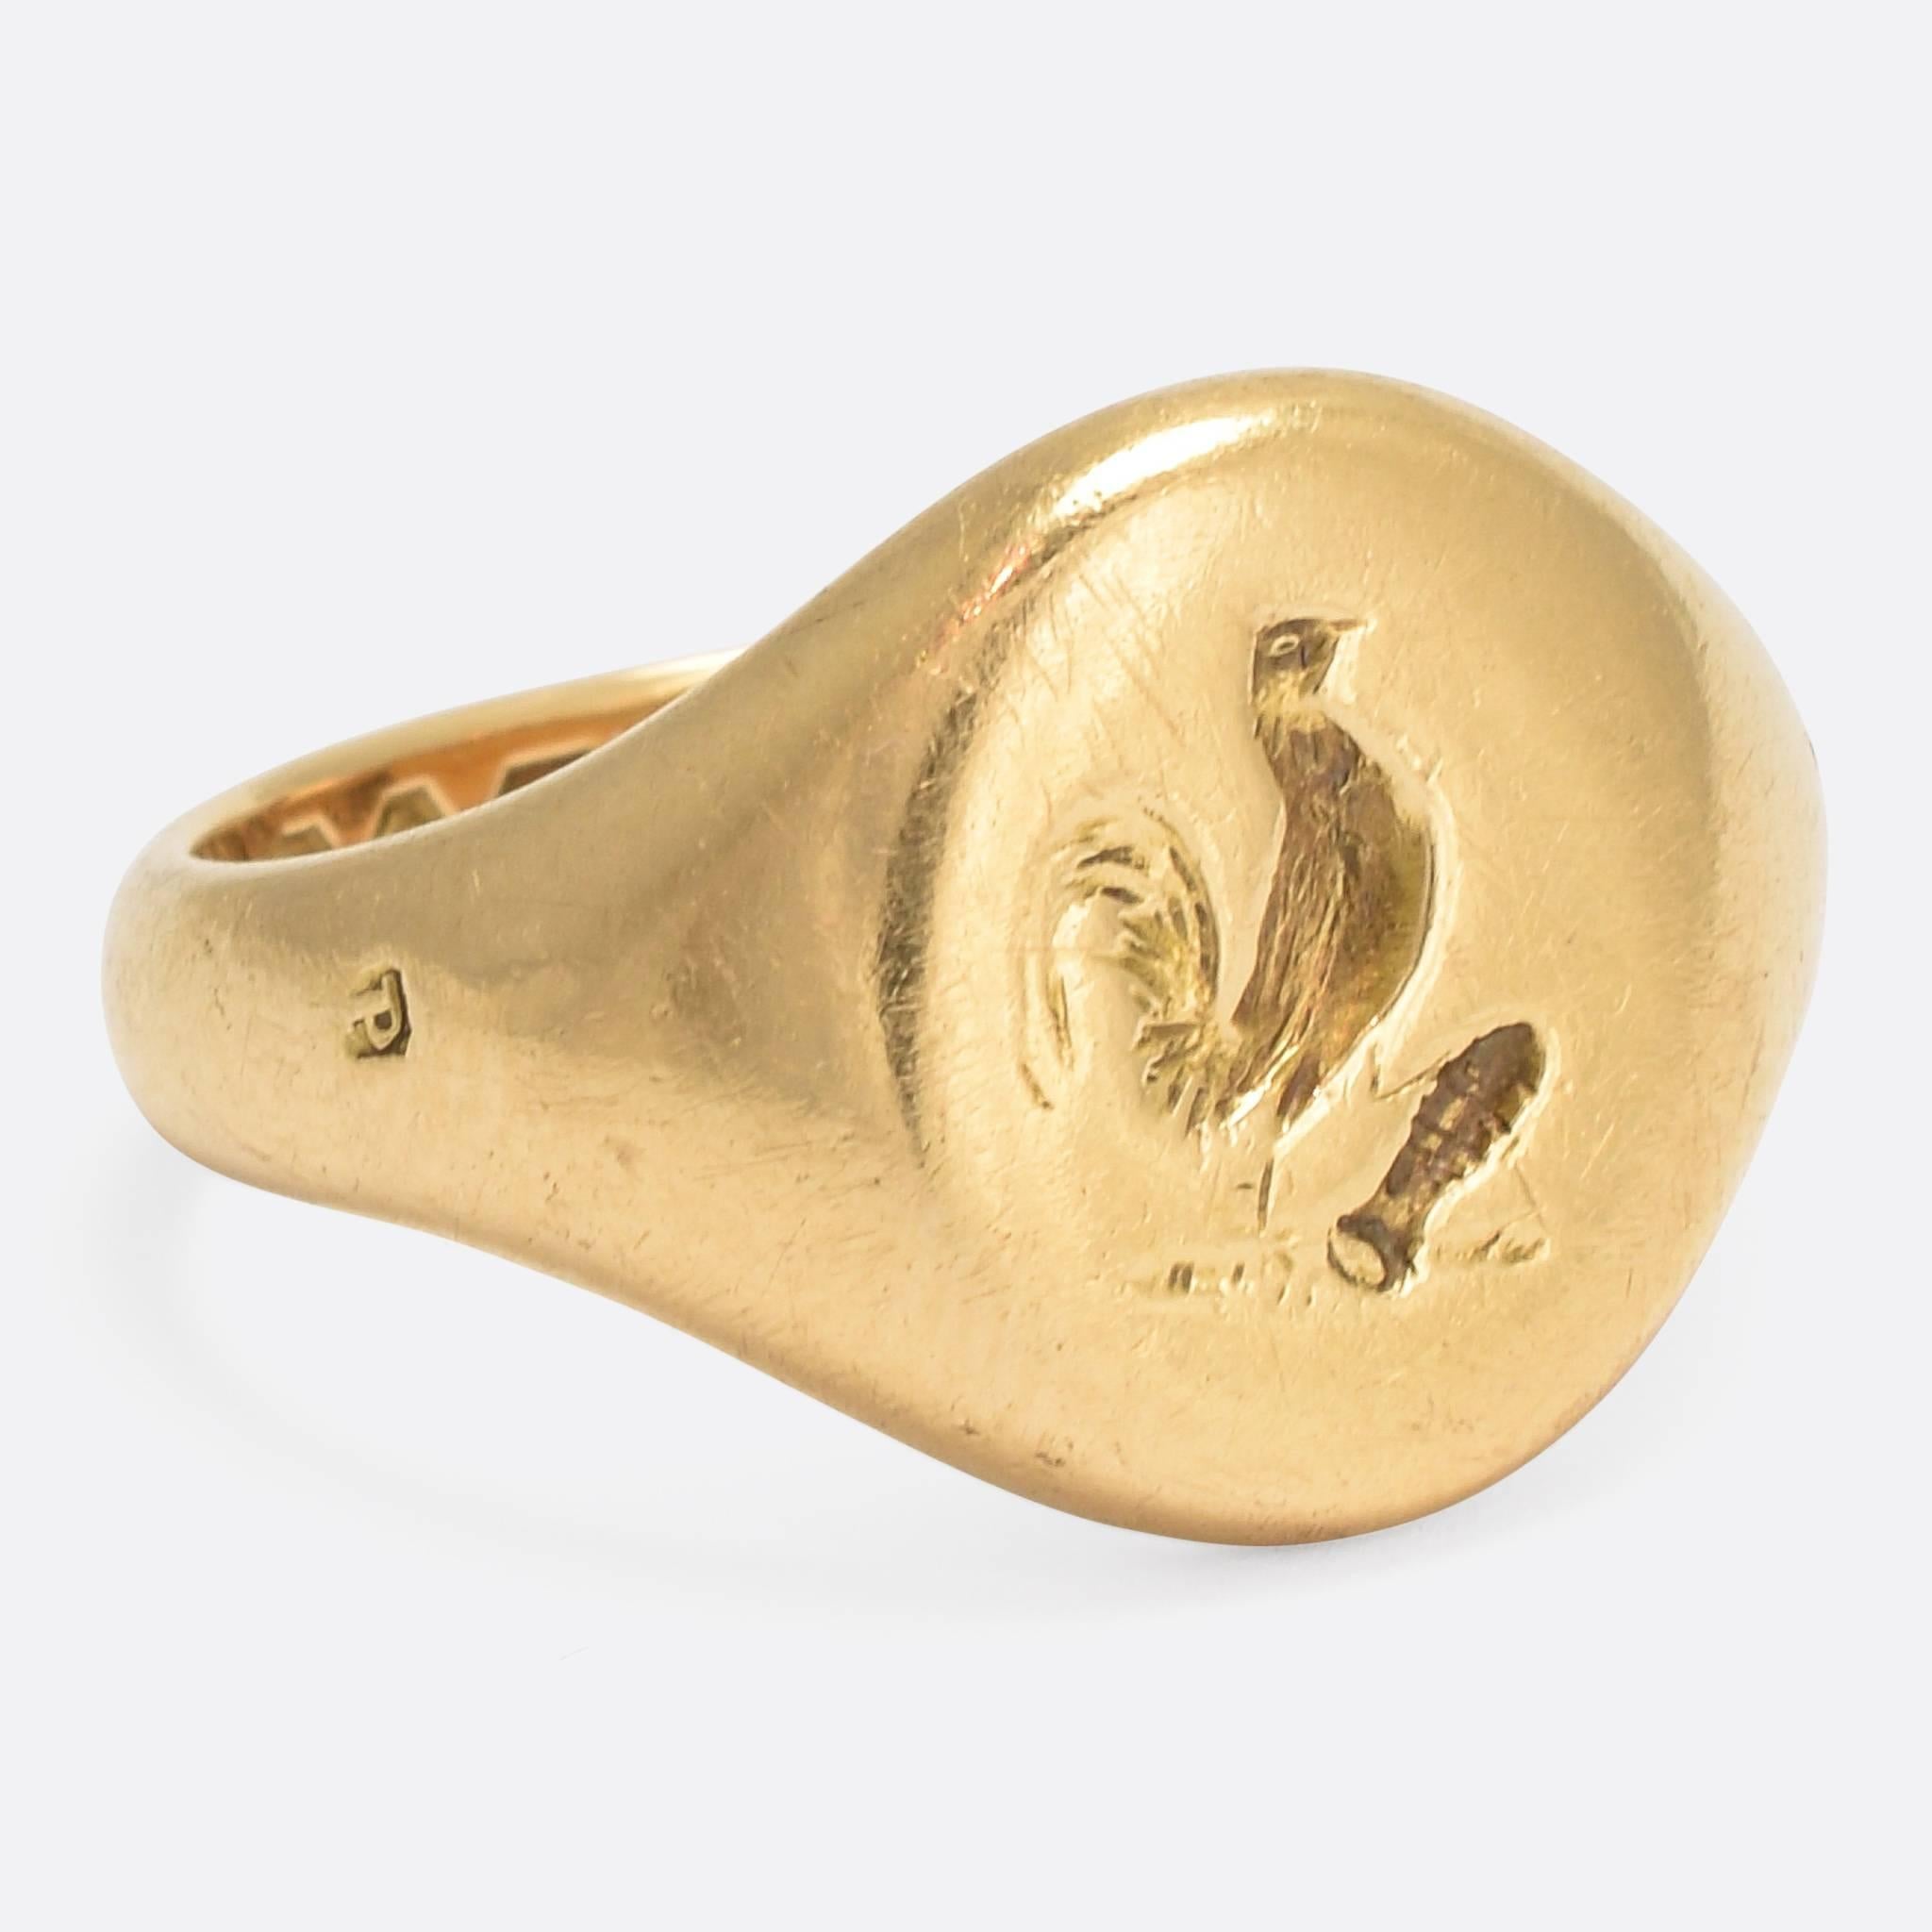 An interesting Edwardian era Signet Ring, modelled in 18k gold and carved with an English heraldic family crest: a rooster holding something (kinda looks like a fish...) in its foot. The ring has clear London hallmarks dating to the year 1910.